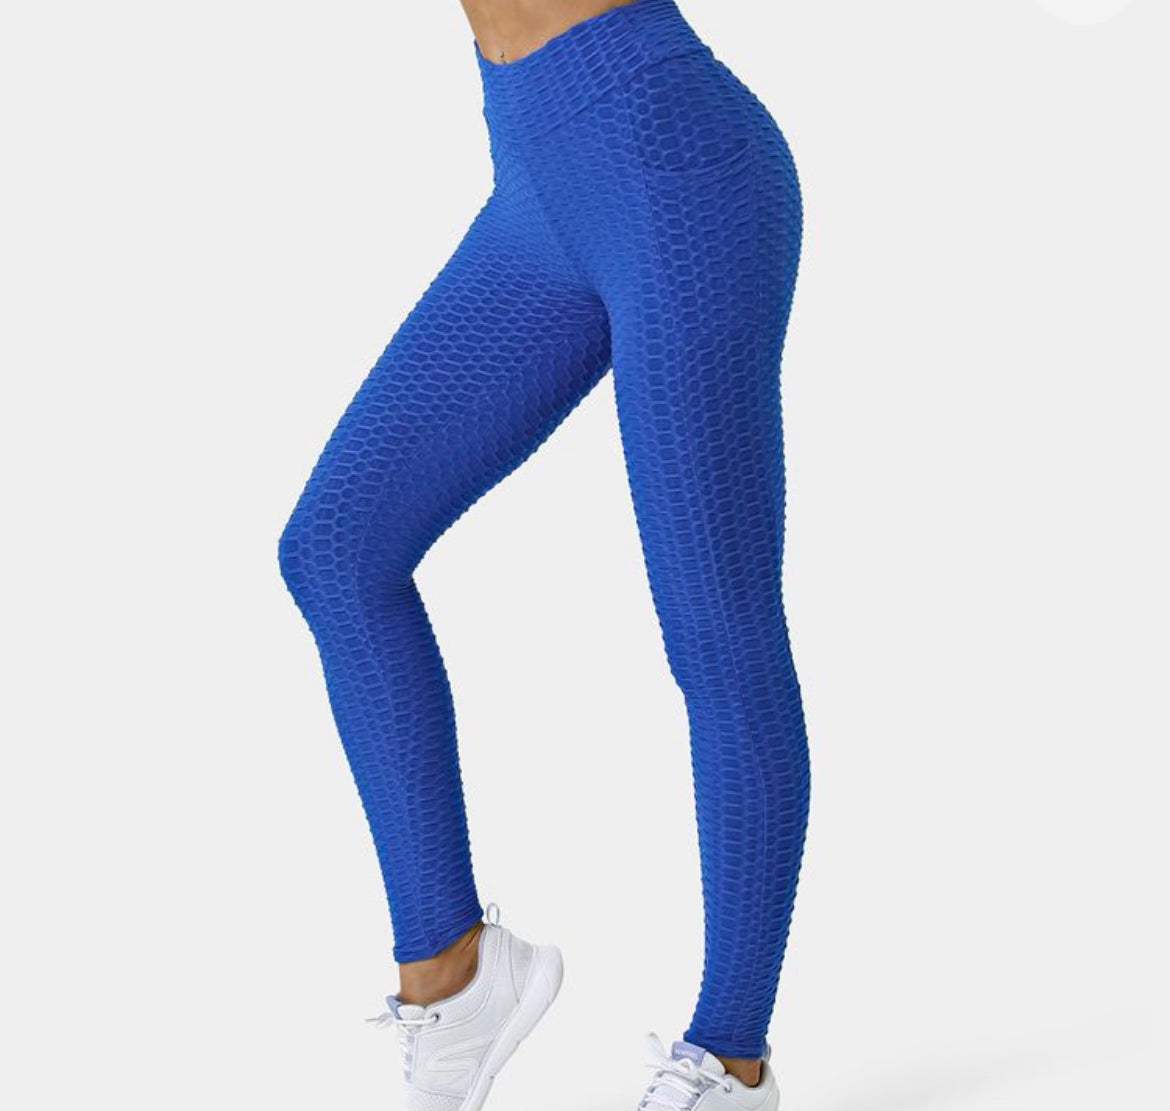 Striped Waist Honeycomb Textured Sports Leggings With Phone Pocket